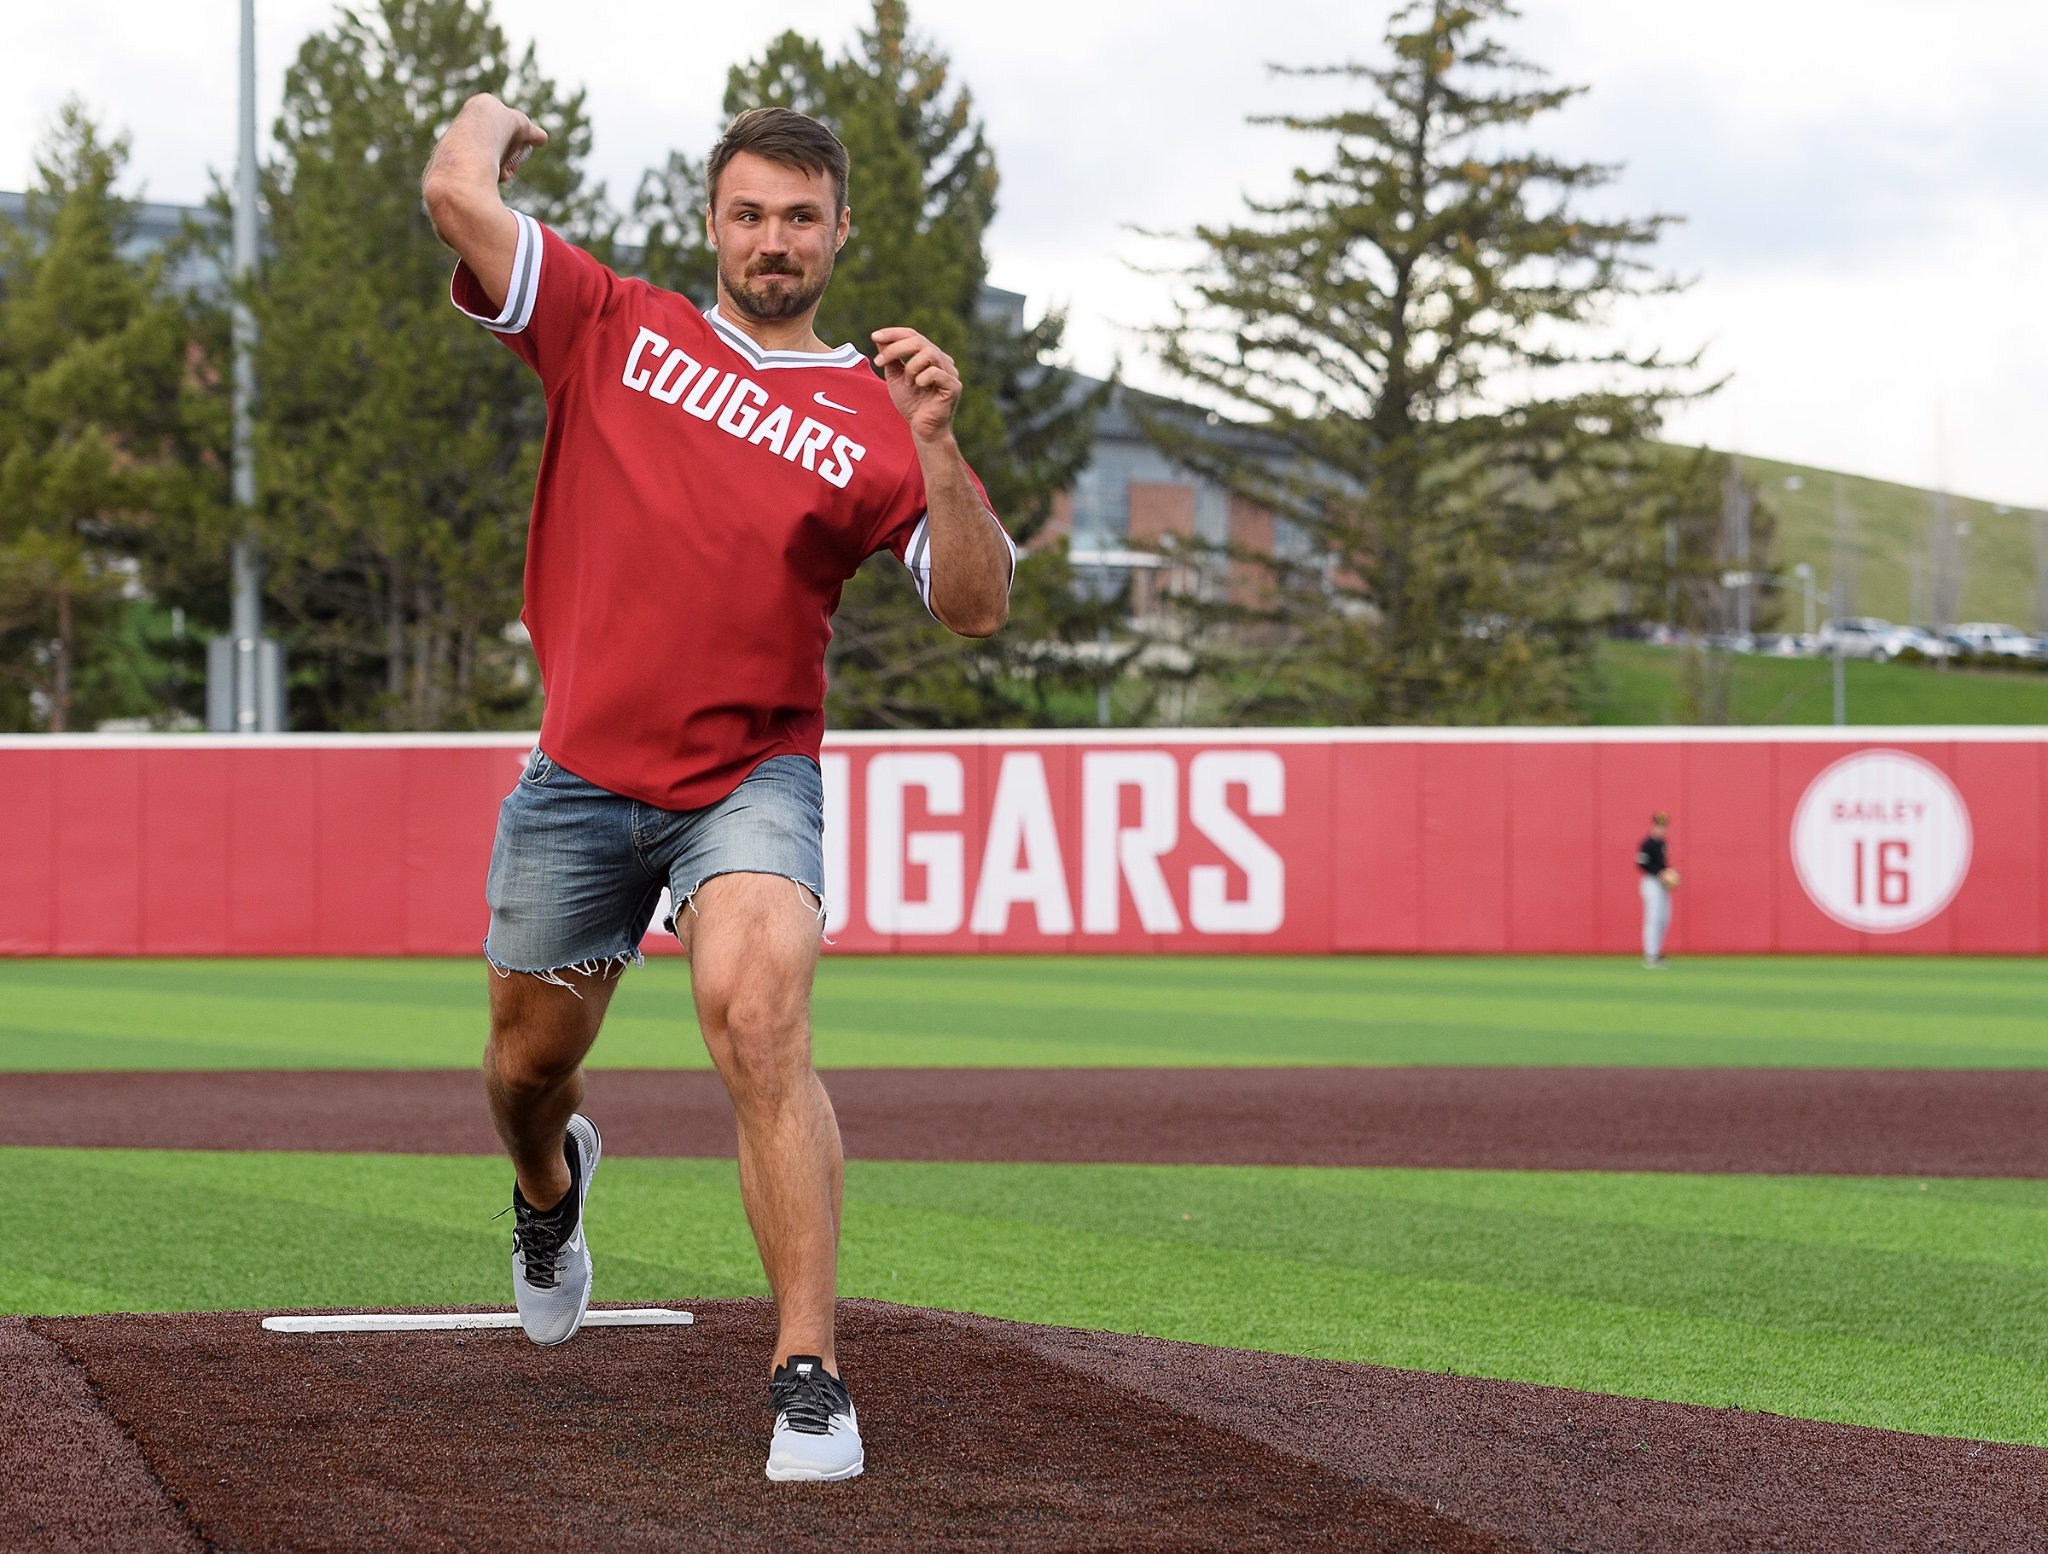 Gardner Minshew On Twitter First Pitch Comin In Hot Thanks For